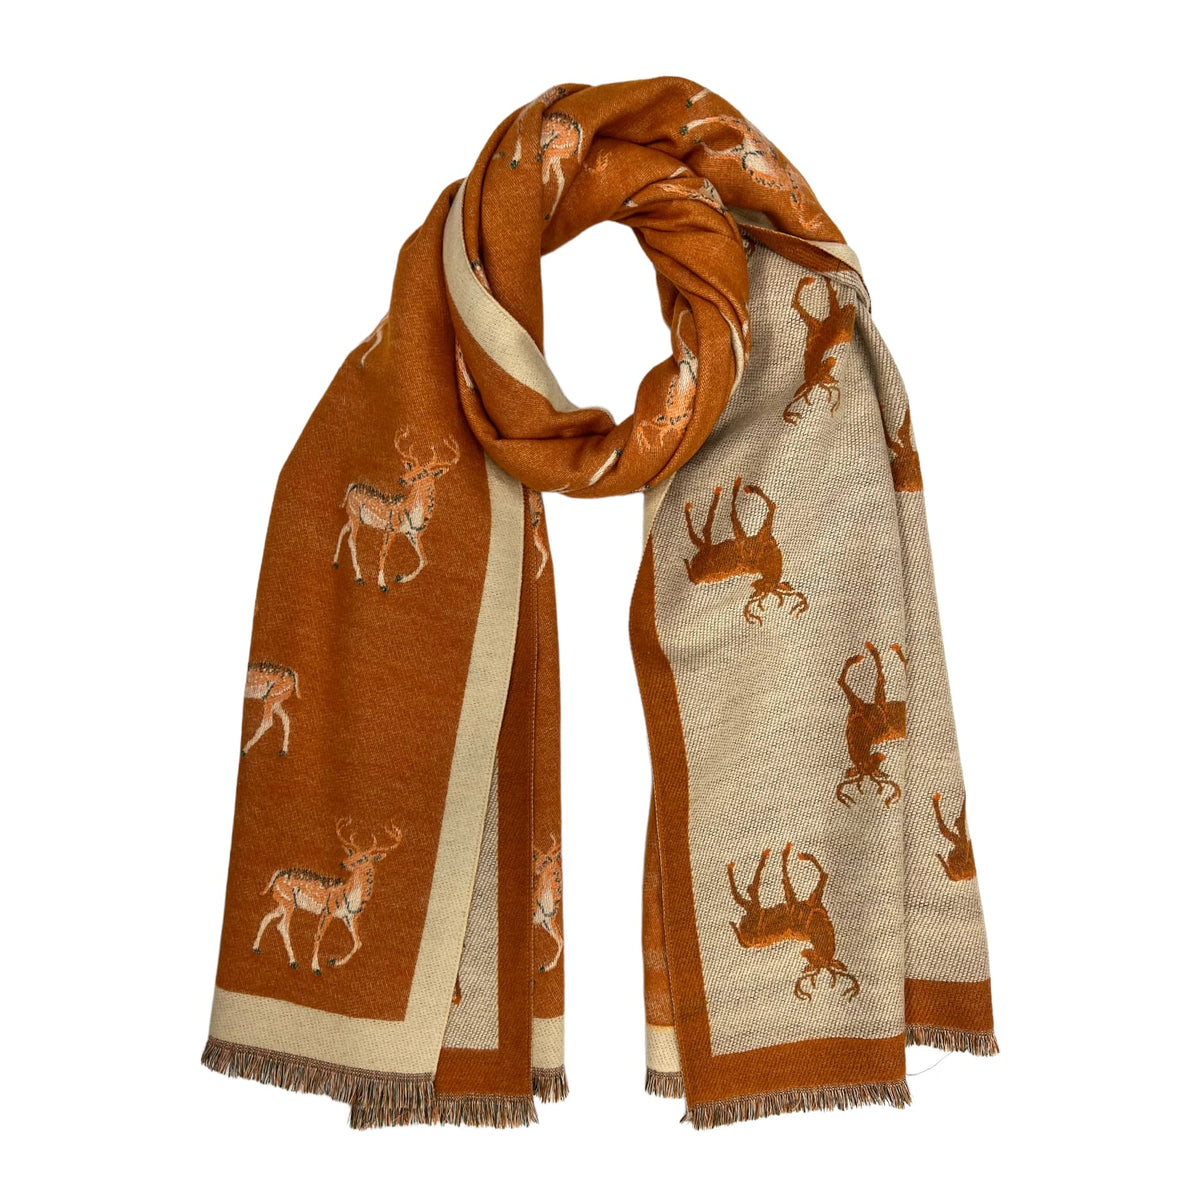 Deer Woven Print Winter Scarf on Reversible Cashmere Blend